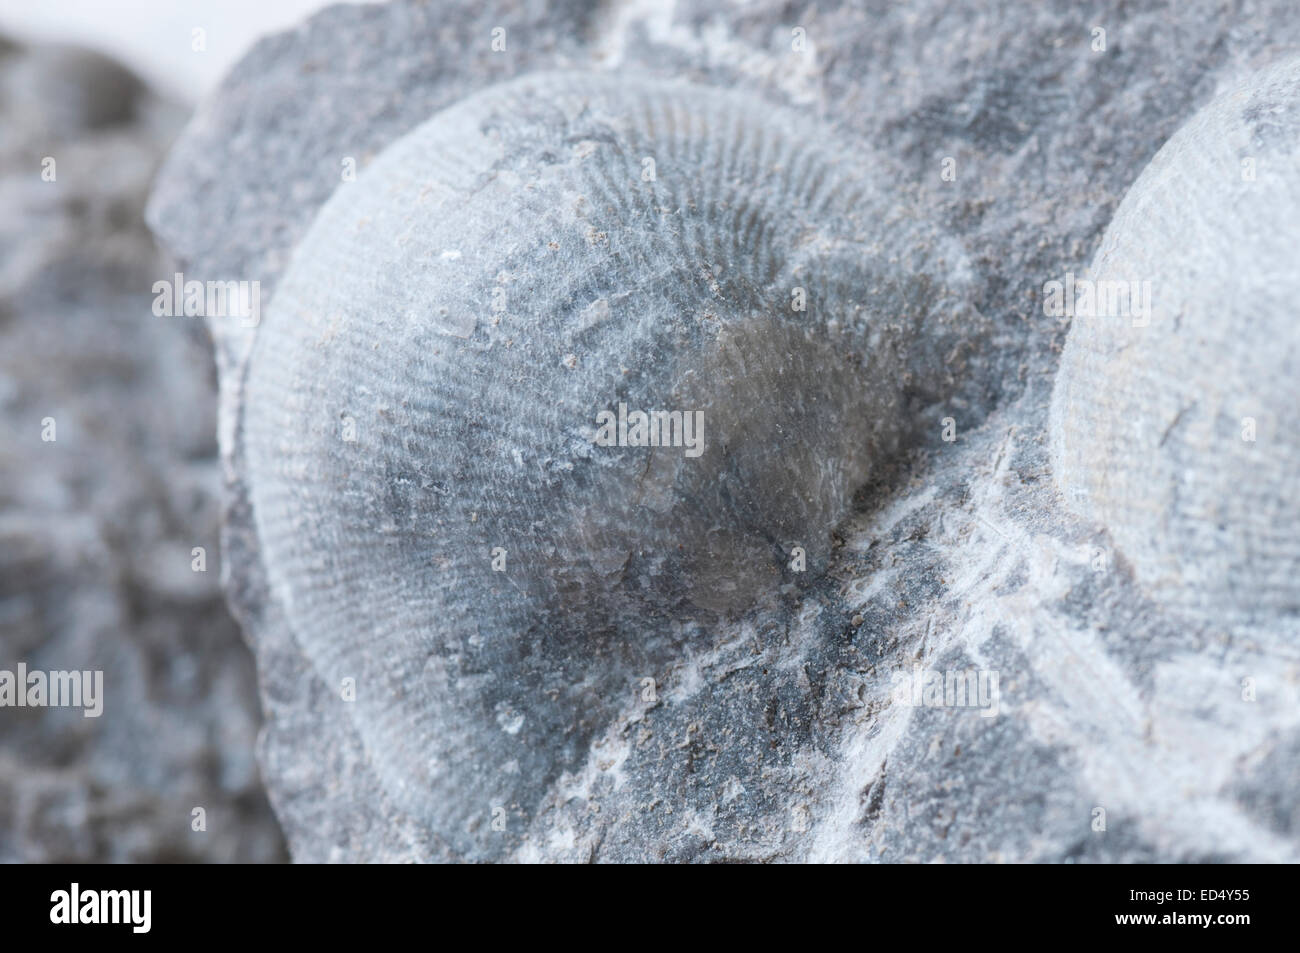 Top shell of the Carboniferous brachiopod Productus from Wensleydale, North Yorkshire Stock Photo